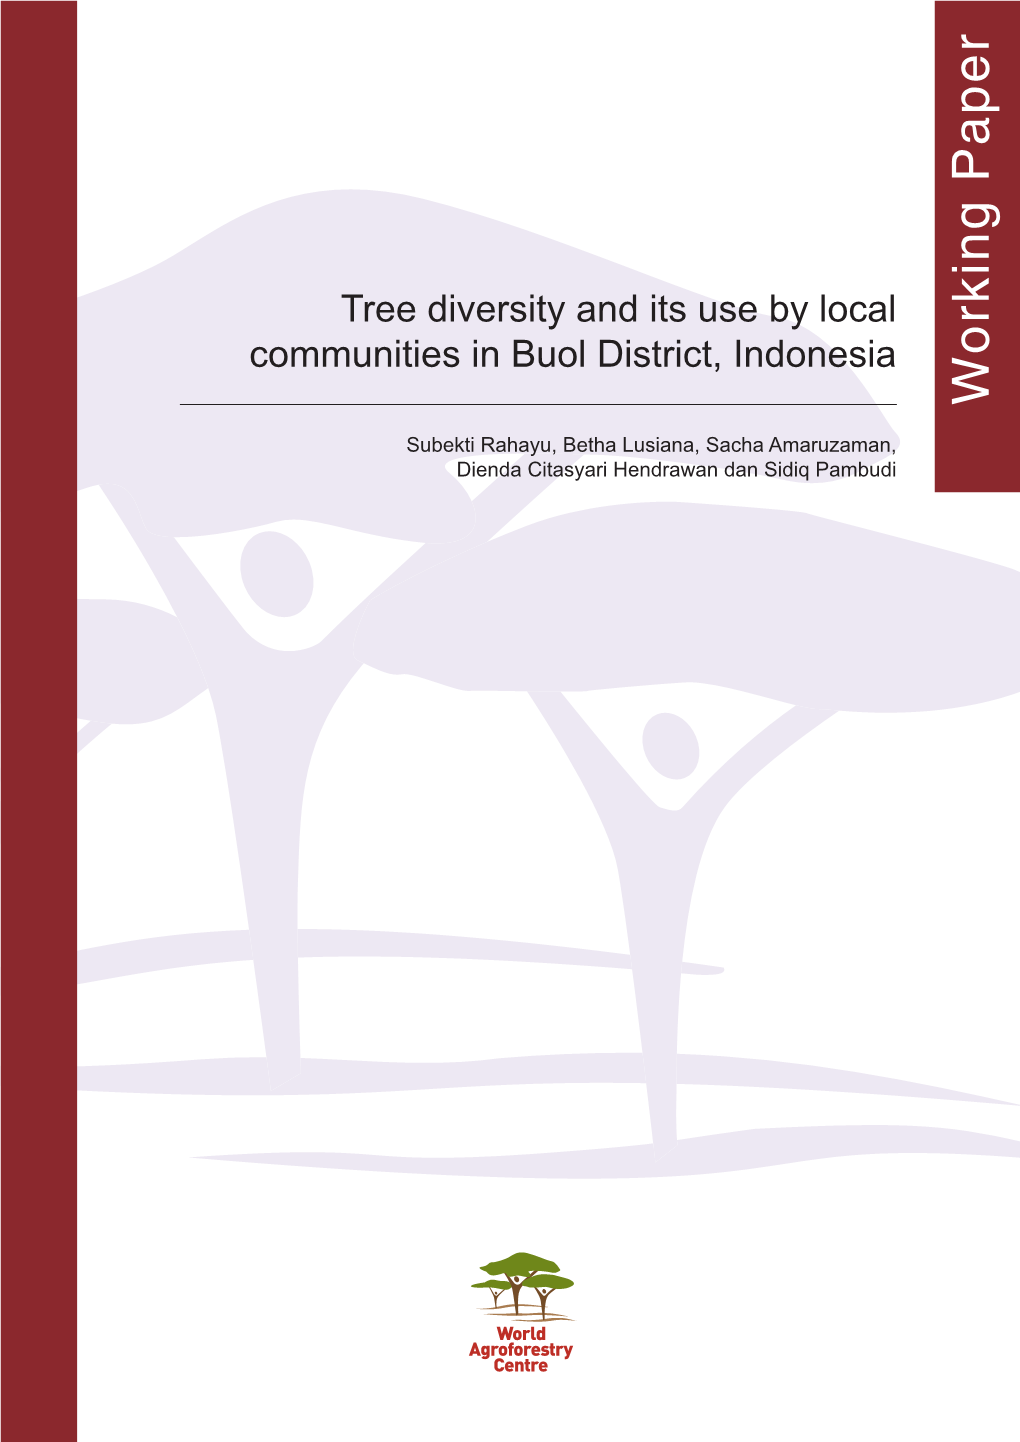 Tree Diversity and Its Use by Local Communities in Buol District, Indonesia